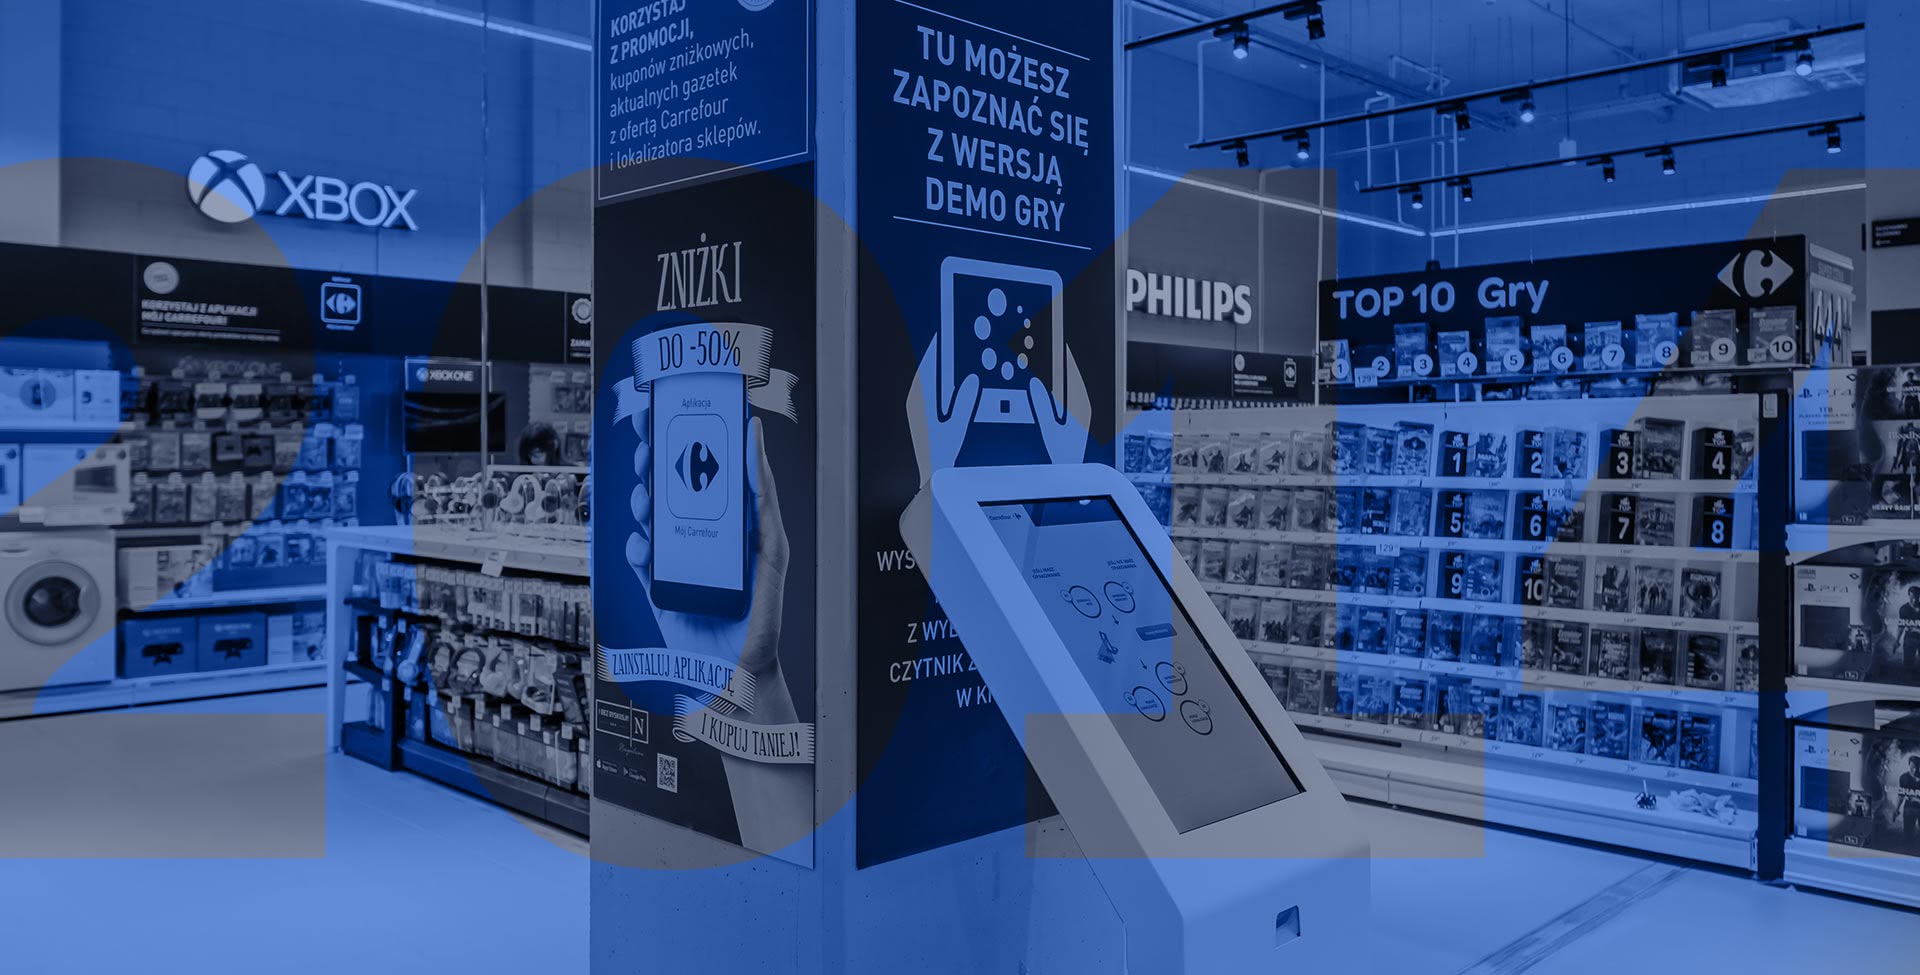 Mój Carrefour (My Carrefour) mobile app was launched.